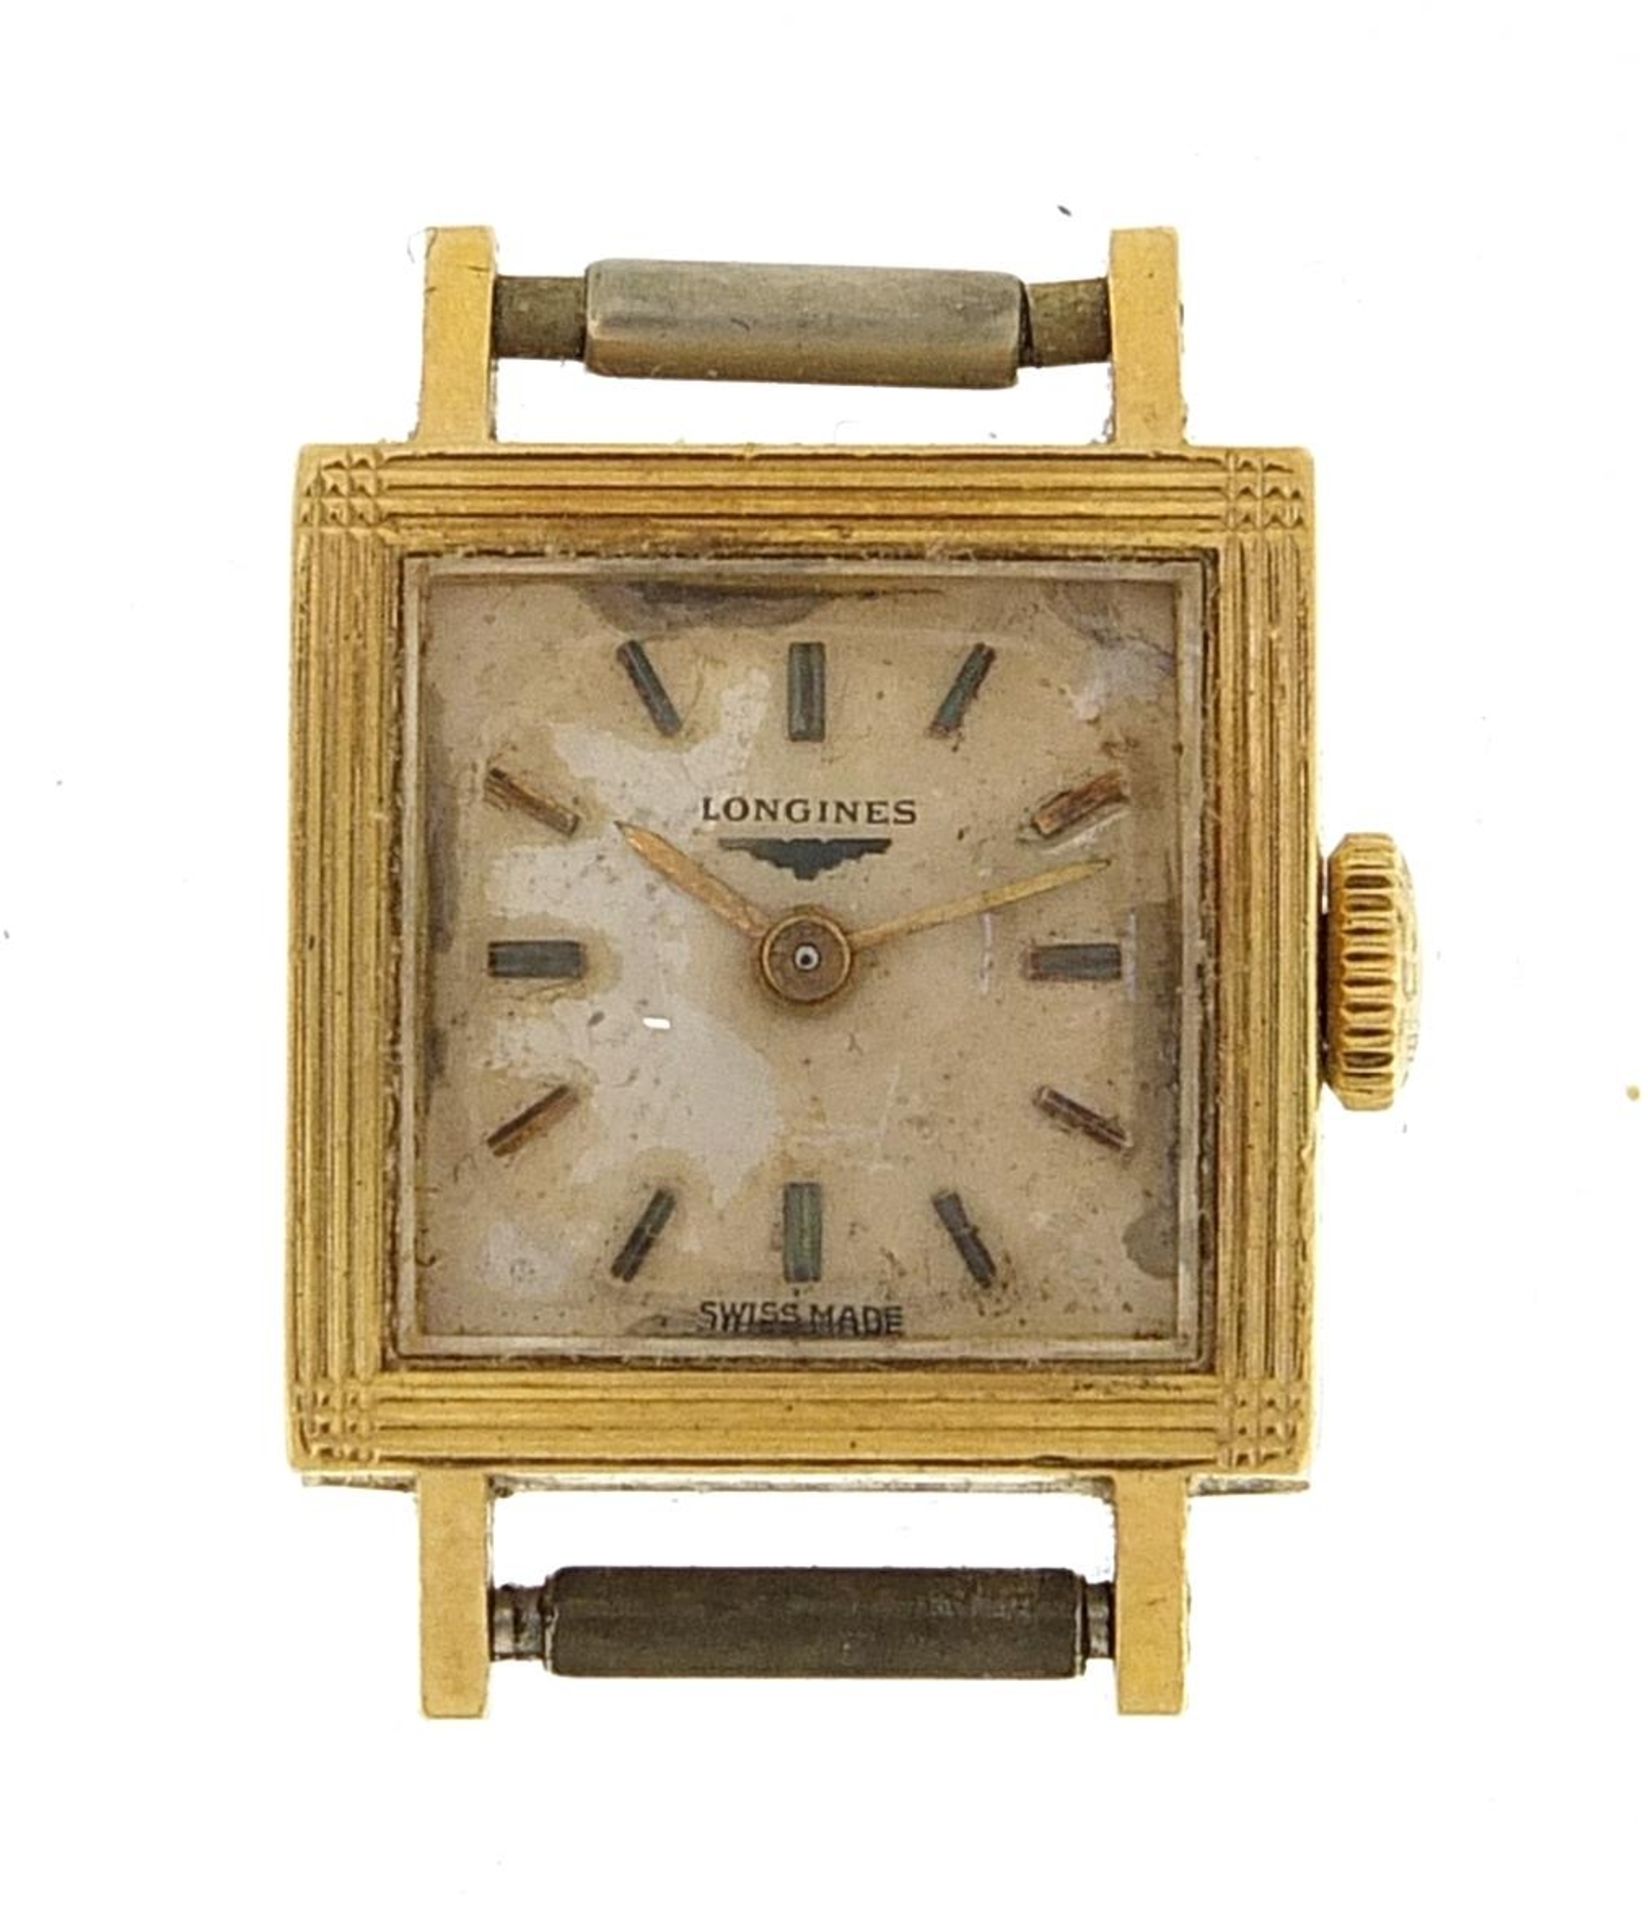 Longines, 18ct gold ladies manual wind wristwatch, the movement numbered 11367137, the case 16mm